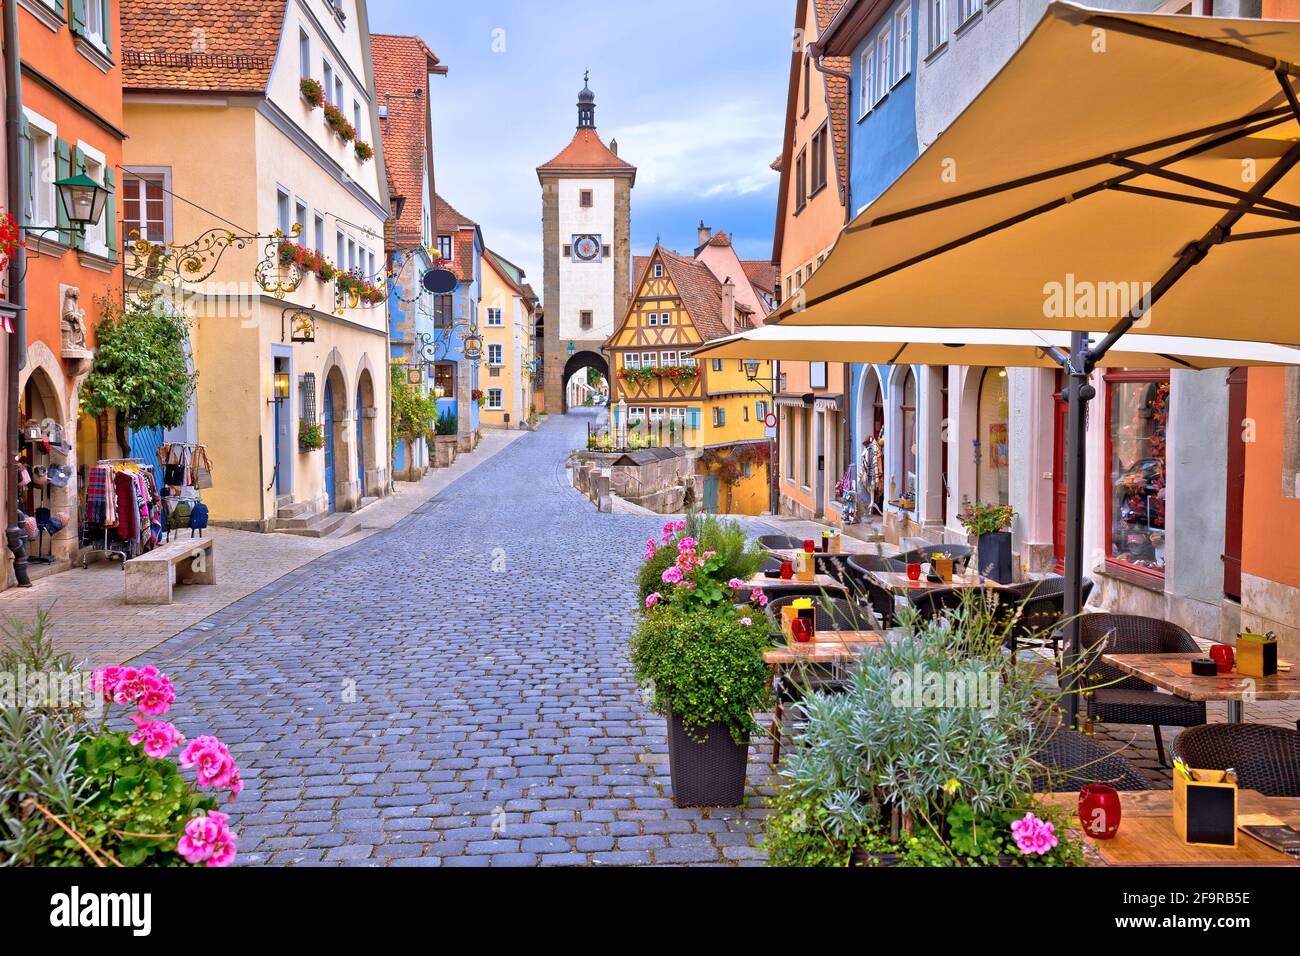 Famous Plonlein gate and cobbled street of historic town of Rothenburg ob der Tauber view, Romantic road of Bavaria region of Germany Stock Photo